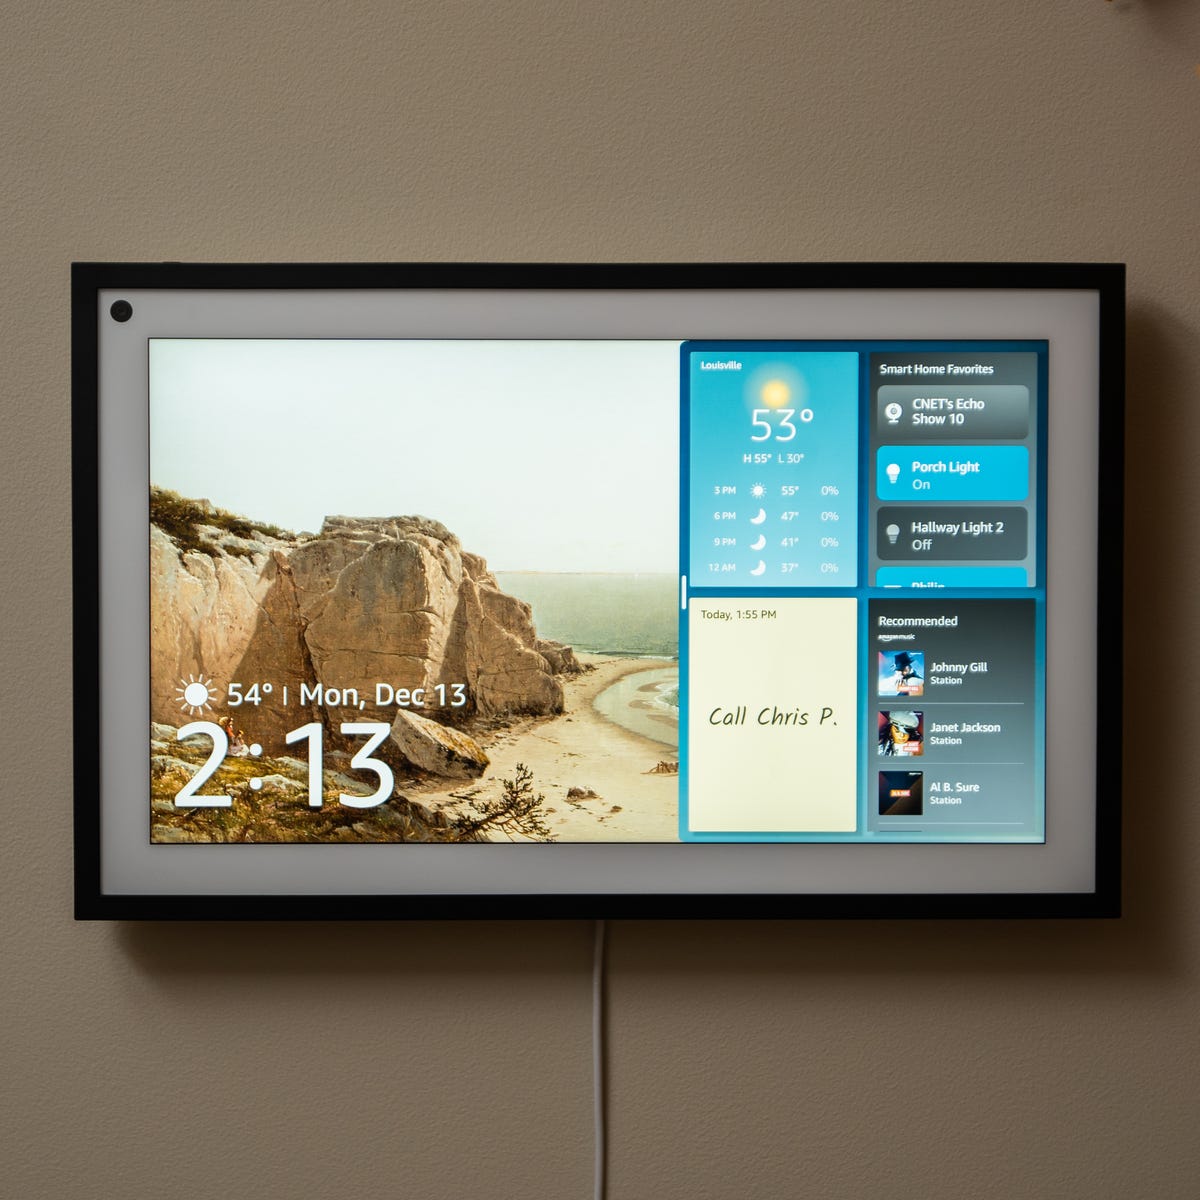 Echo Show 8 review: small, but worth its weight - Reviewed